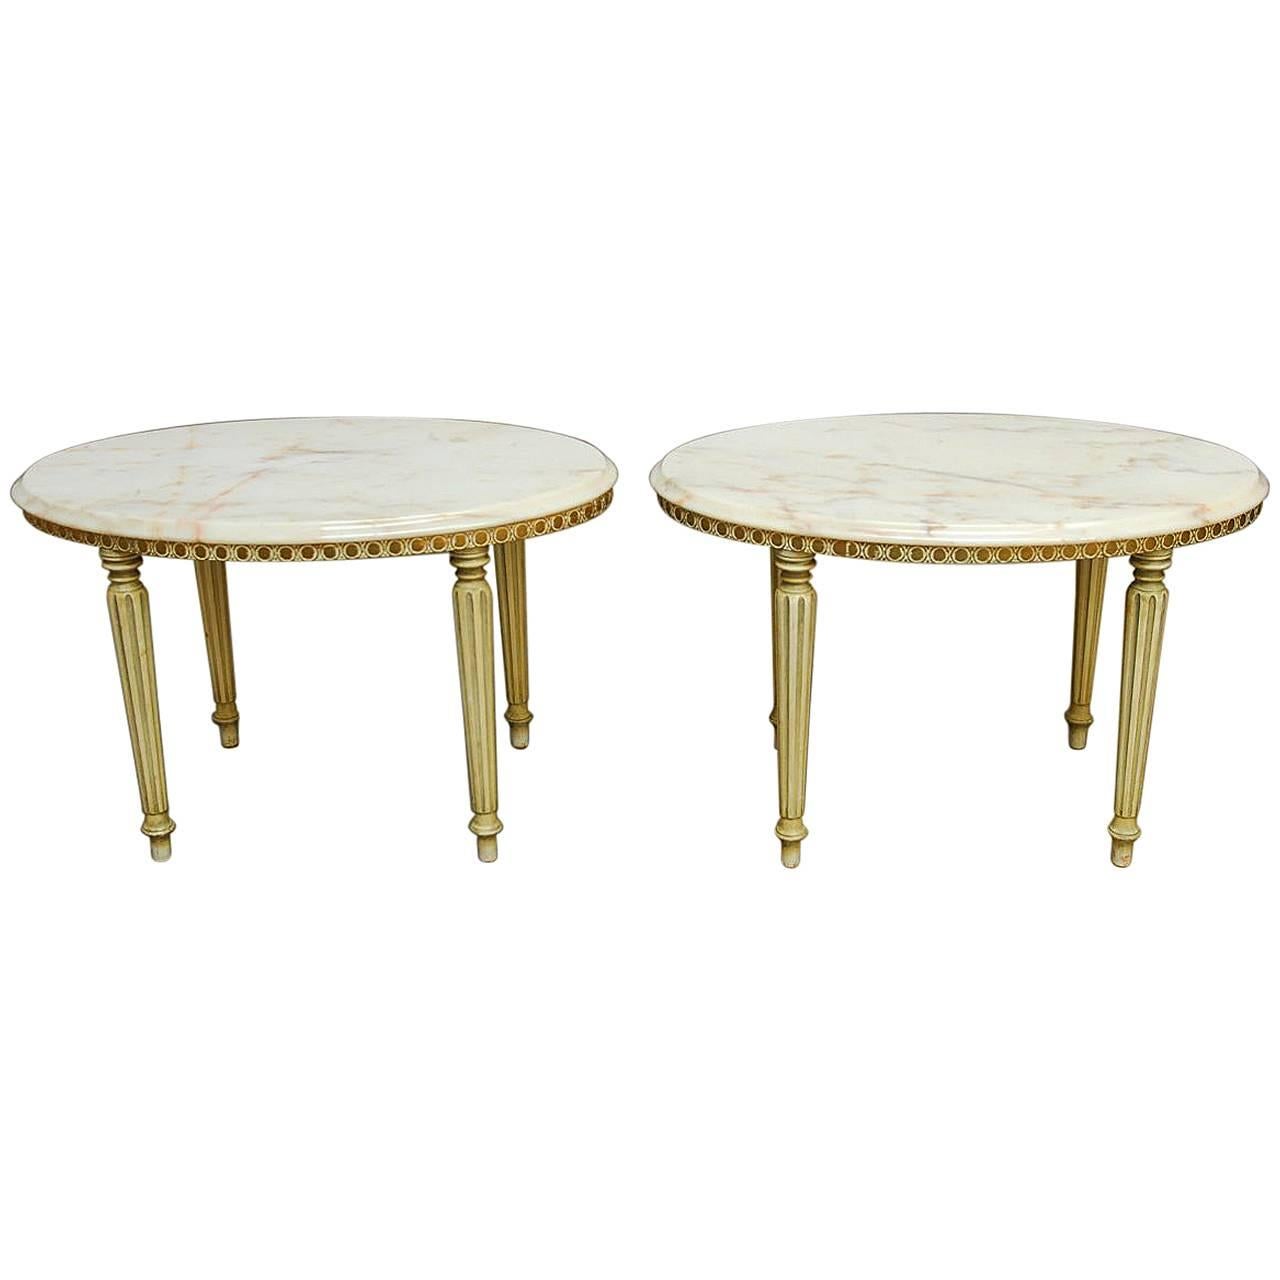 Pair of Louis XVI Style Oval Marble Top Drink Tables